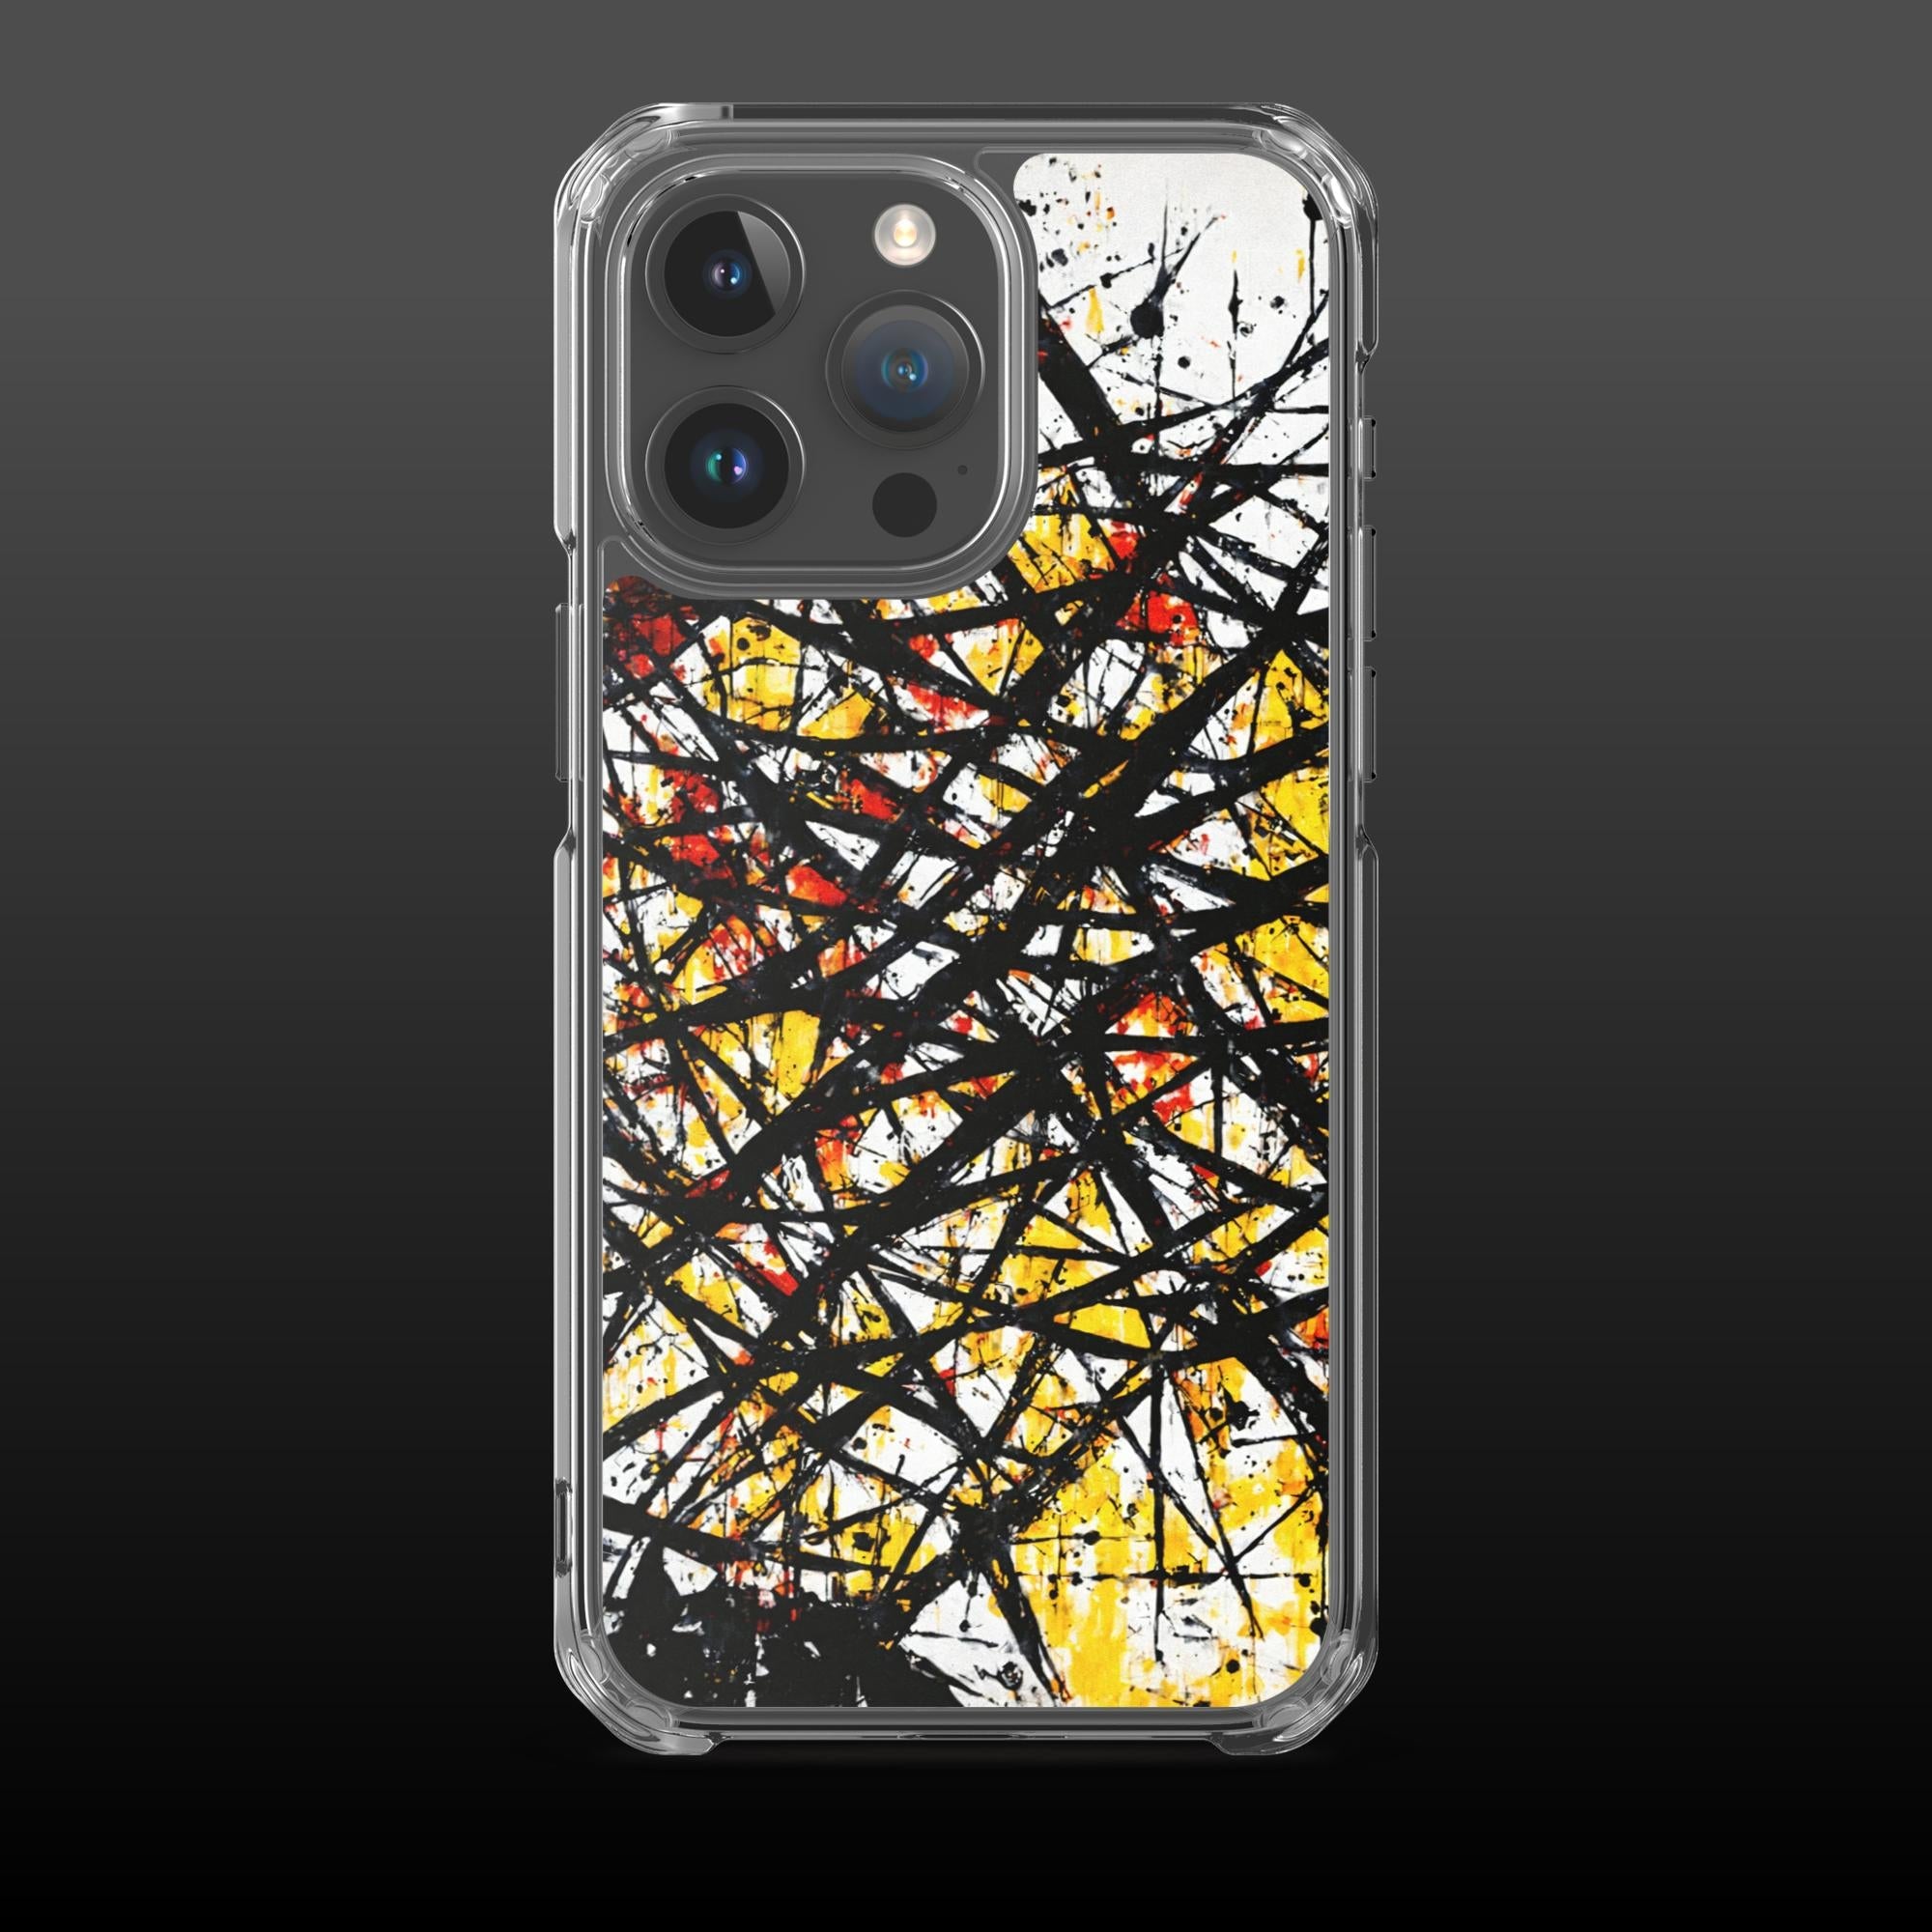 "Unyielding emotions" clear iphone case - Clear iphone case - Ever colorful